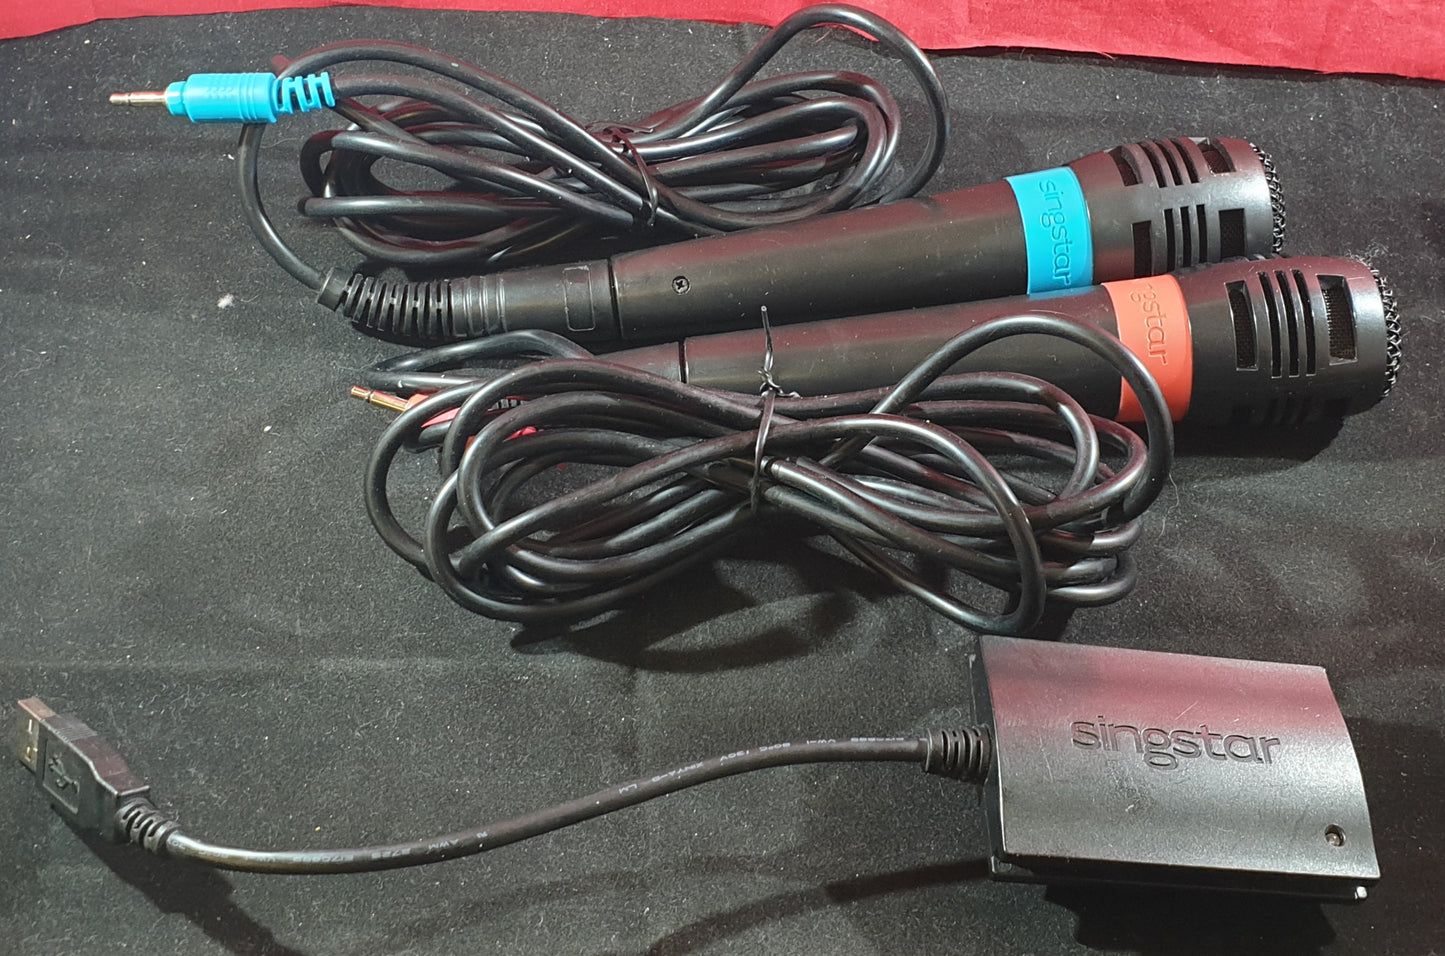 Singstar Microphones Sony Playstation 2, 3 & 4 (PS2, PS3, & PS4) Accessory